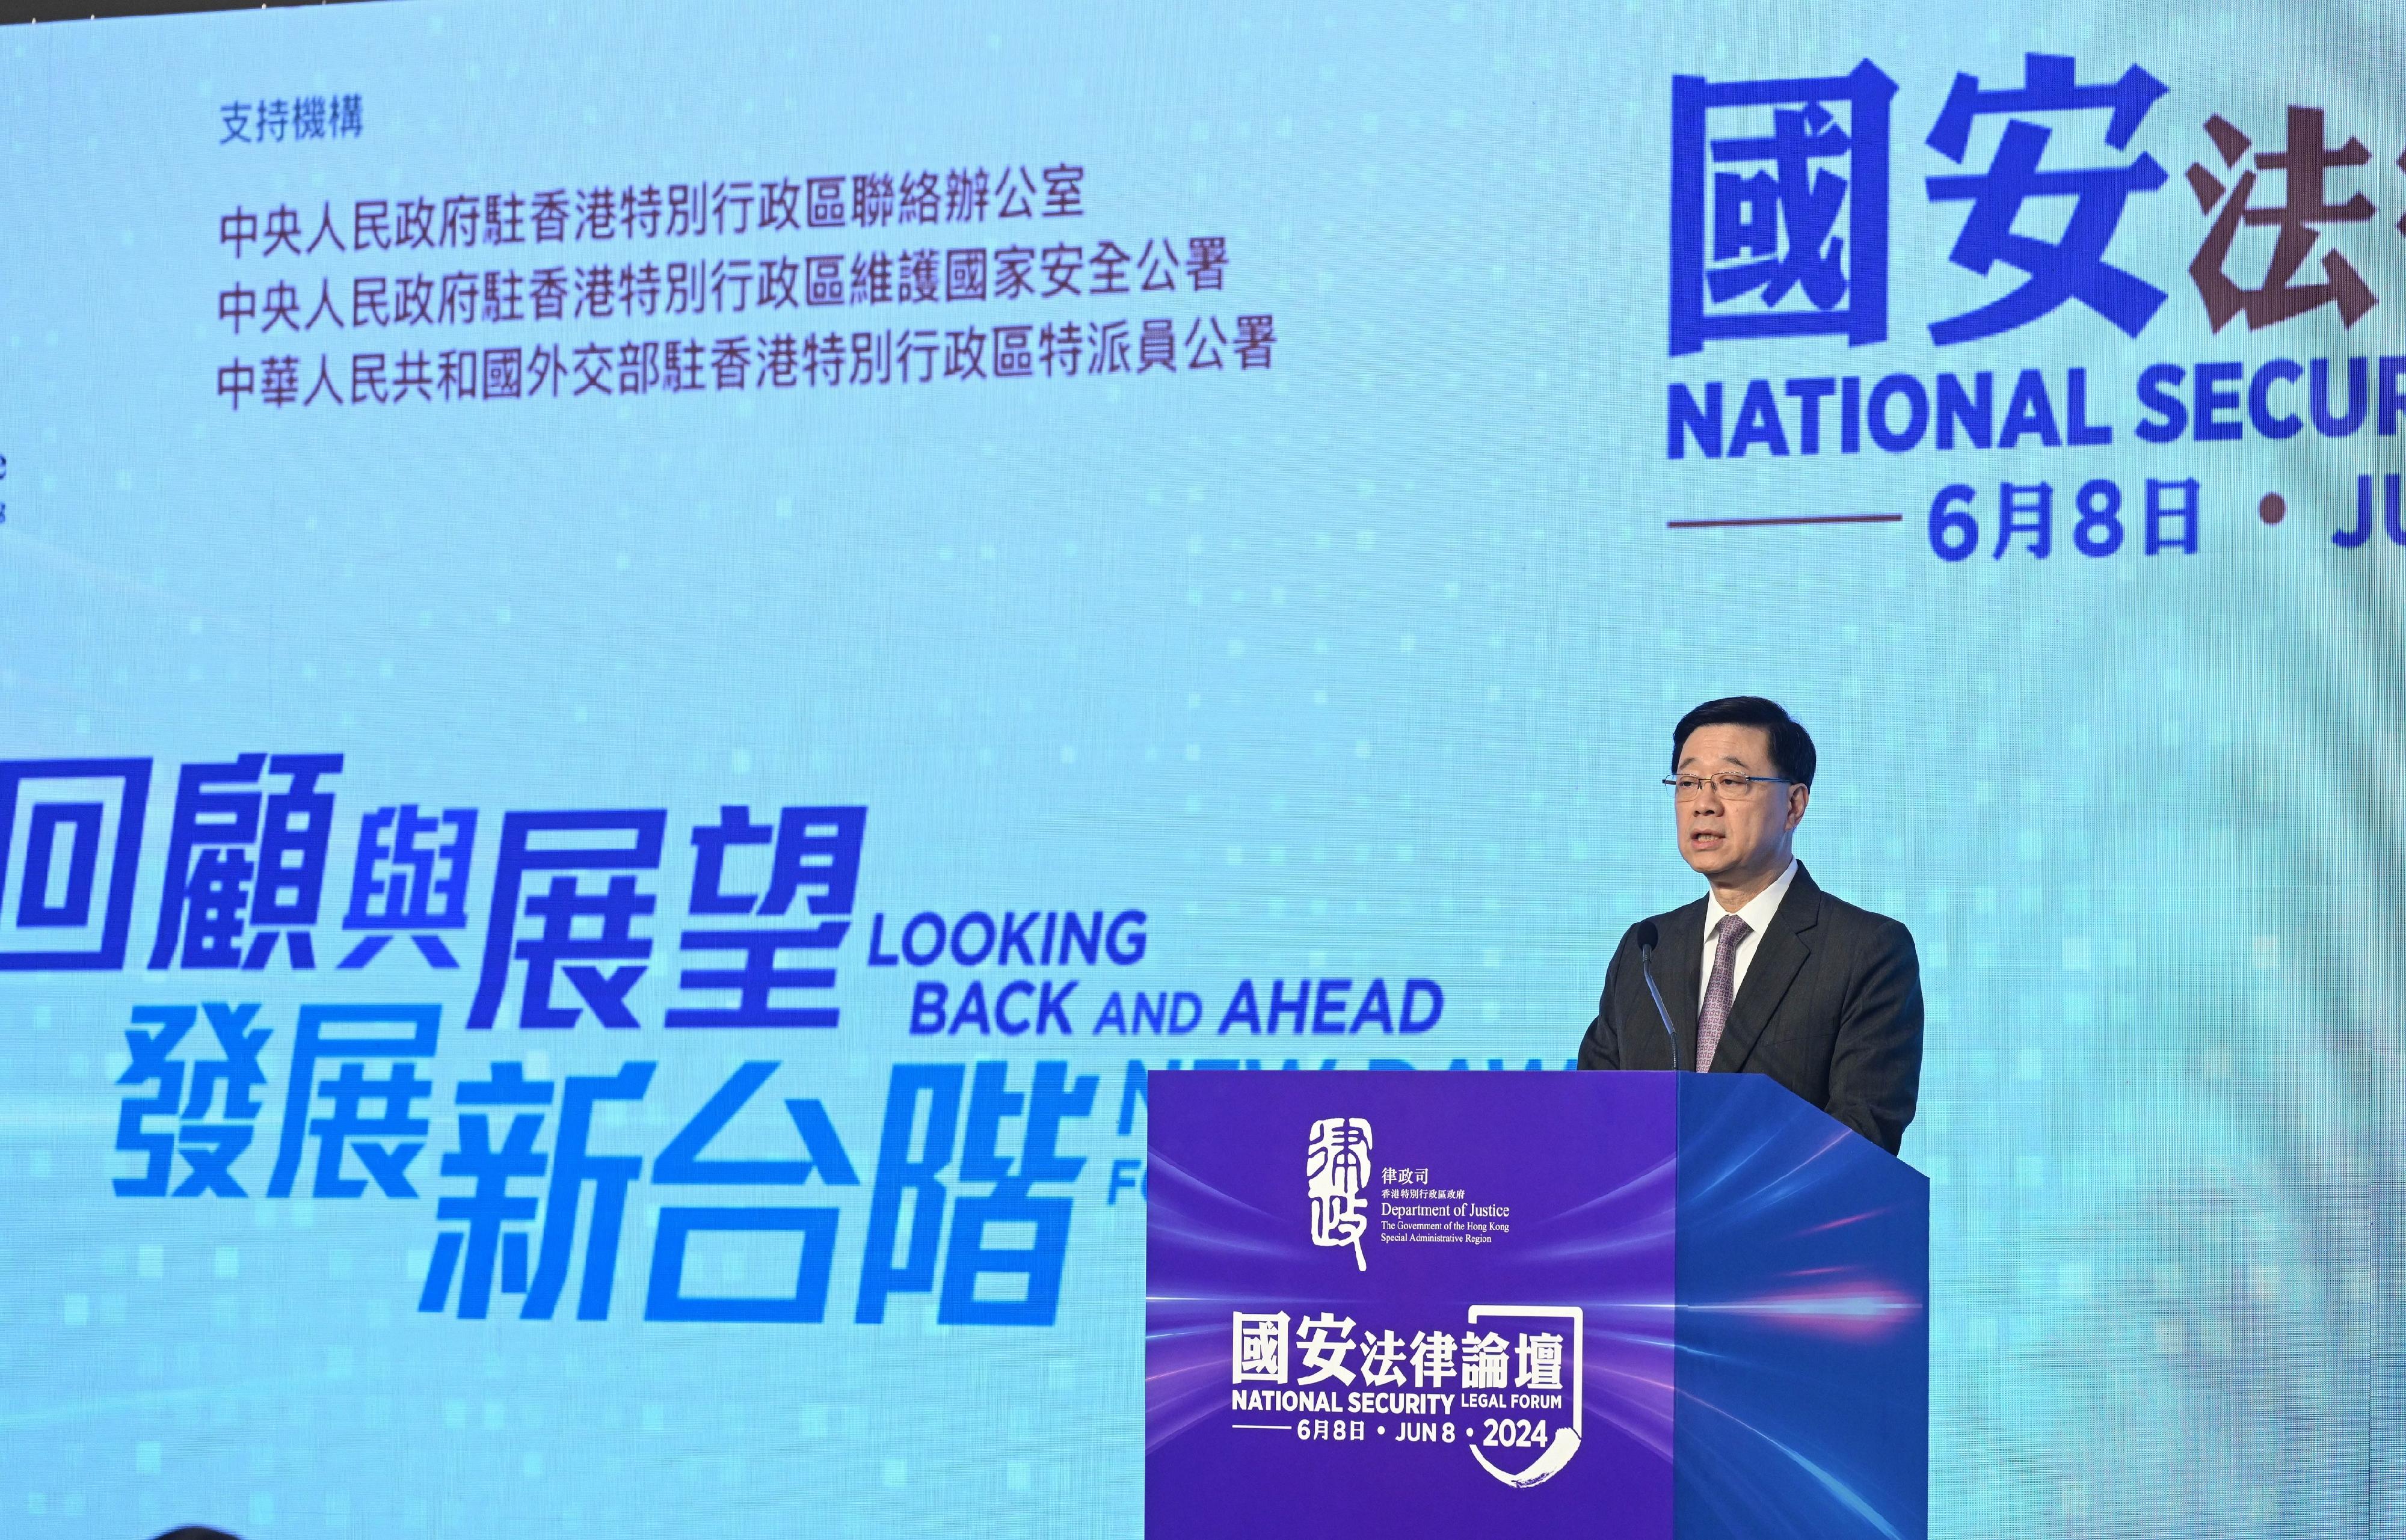 The Department of Justice today (June 8) held the National Security Legal Forum with the theme of "Looking Back and Ahead, New Dawn for Development". Photo shows the Chief Executive, Mr John Lee, delivering his opening remarks at the forum.